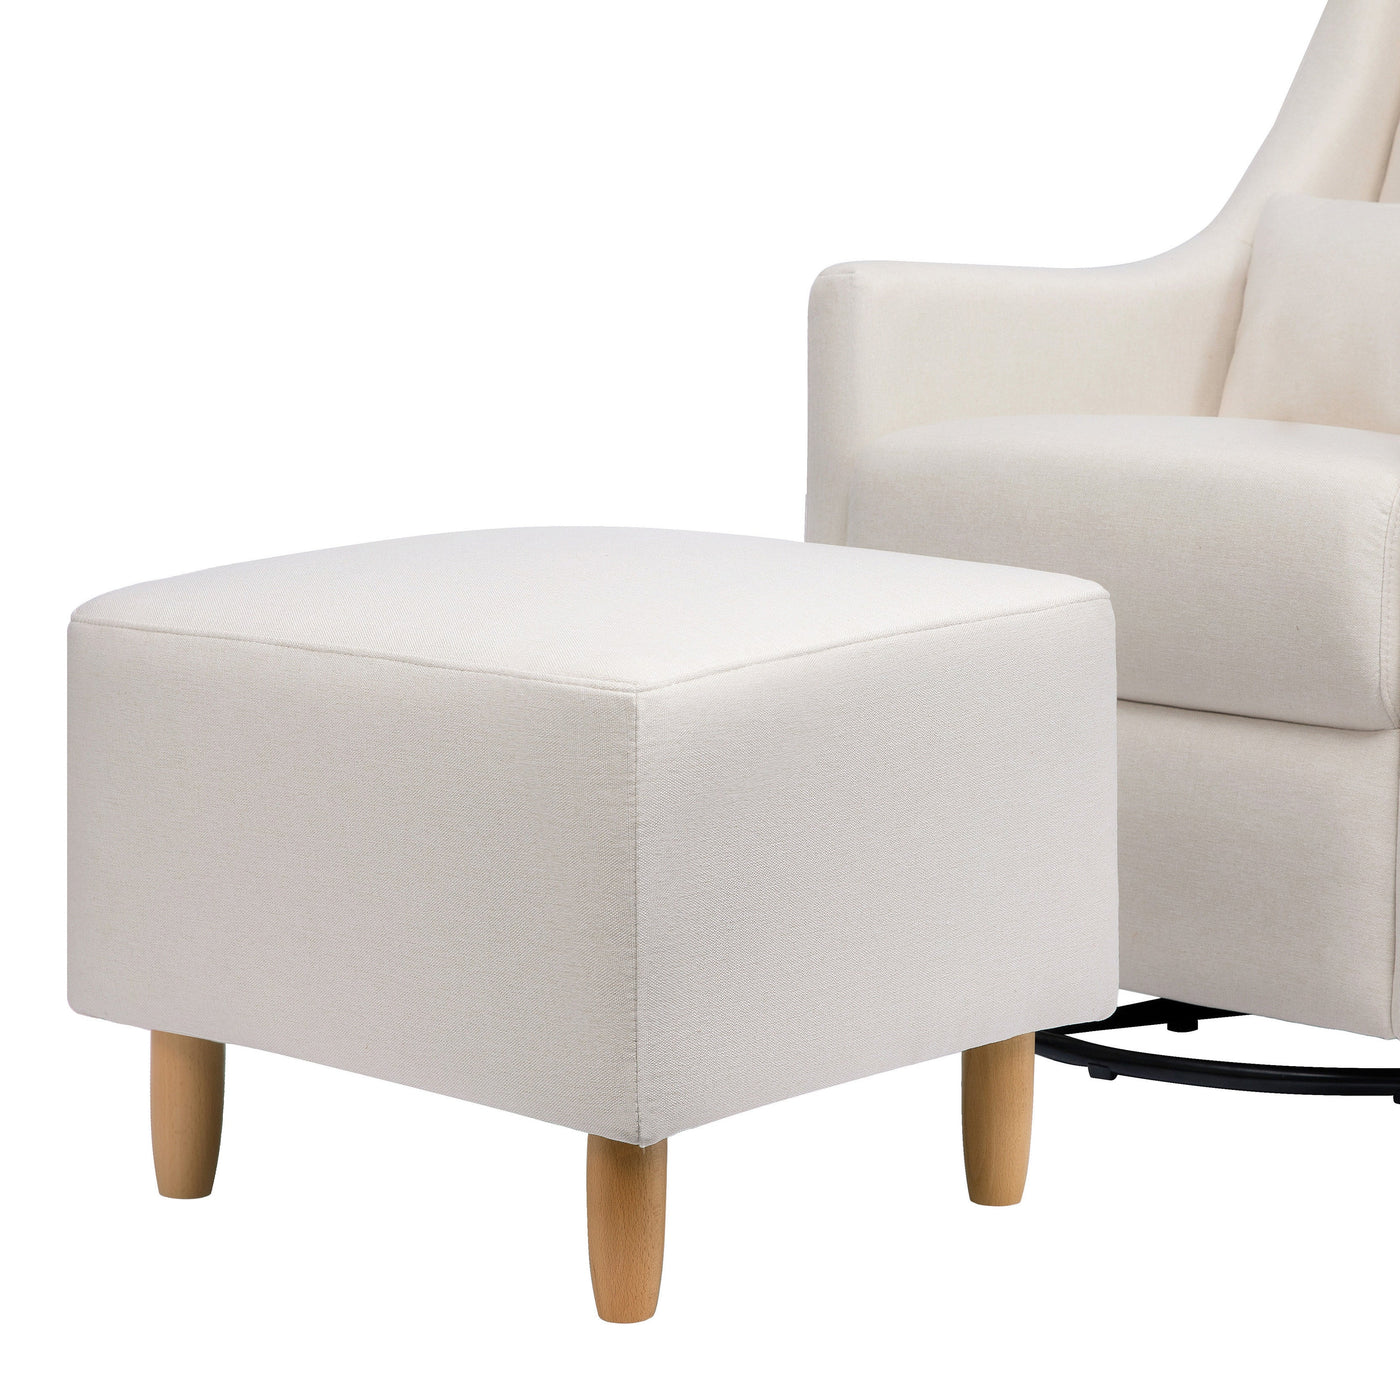 Babyletto Toco Swivel Glider and Ottoman - Performance Fabric